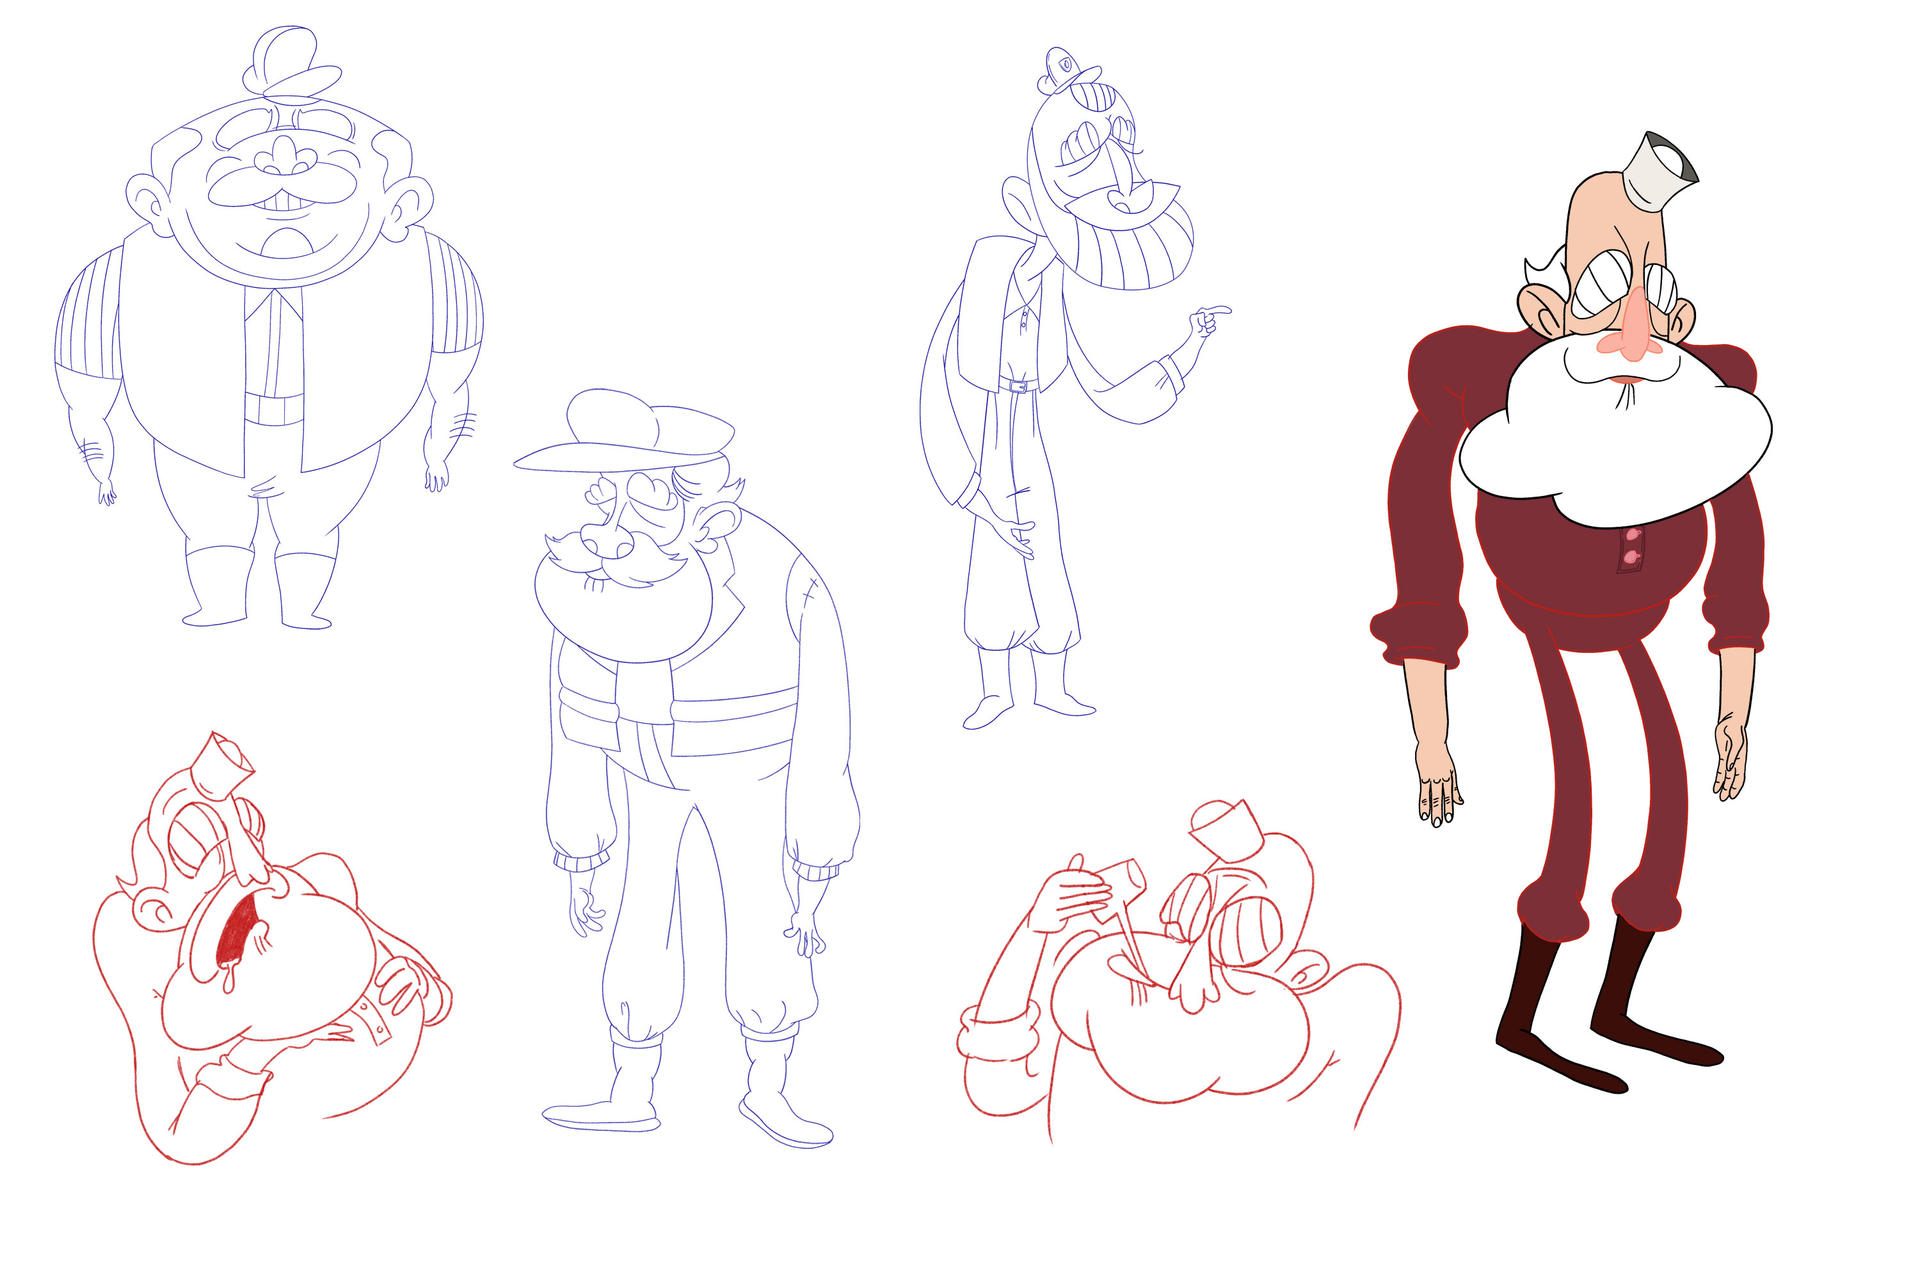 grand pappy character concept